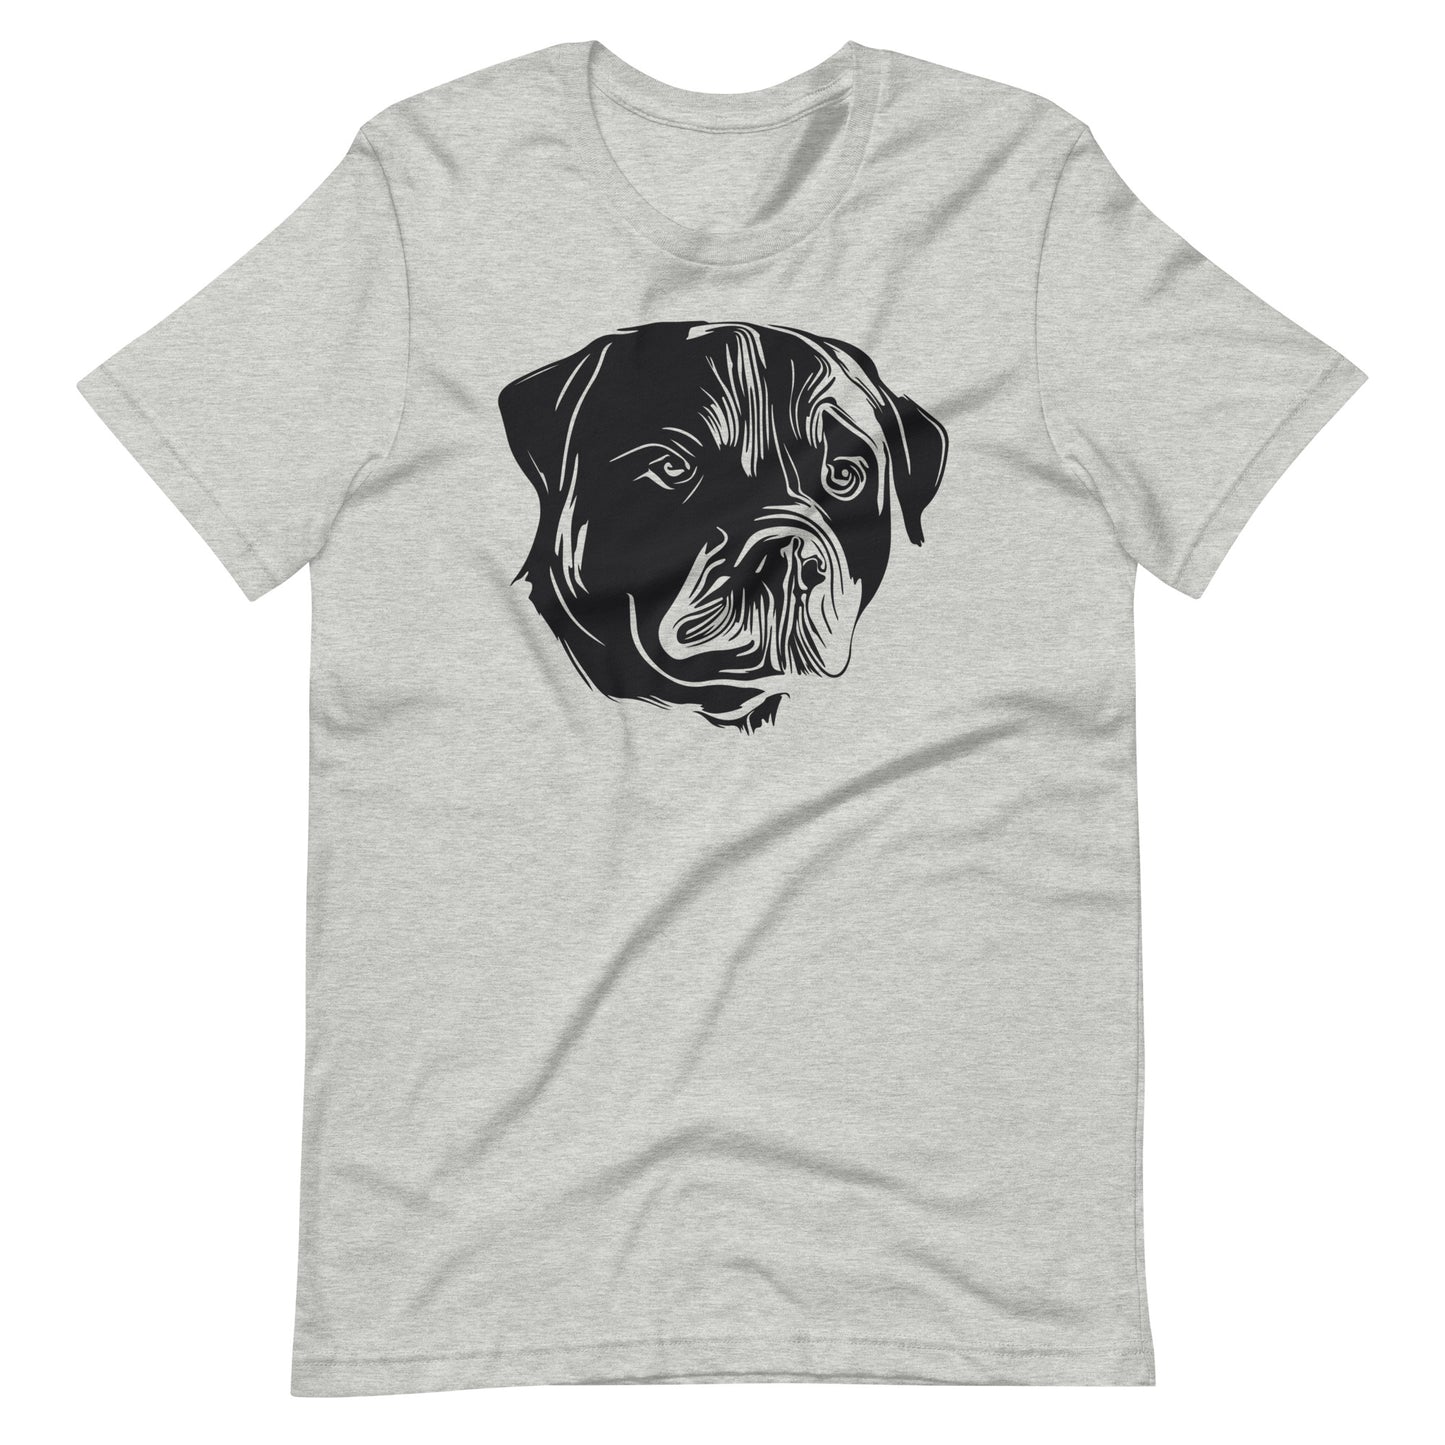 Black Rottweiler face silhouette on unisex athletic heather t-shirt